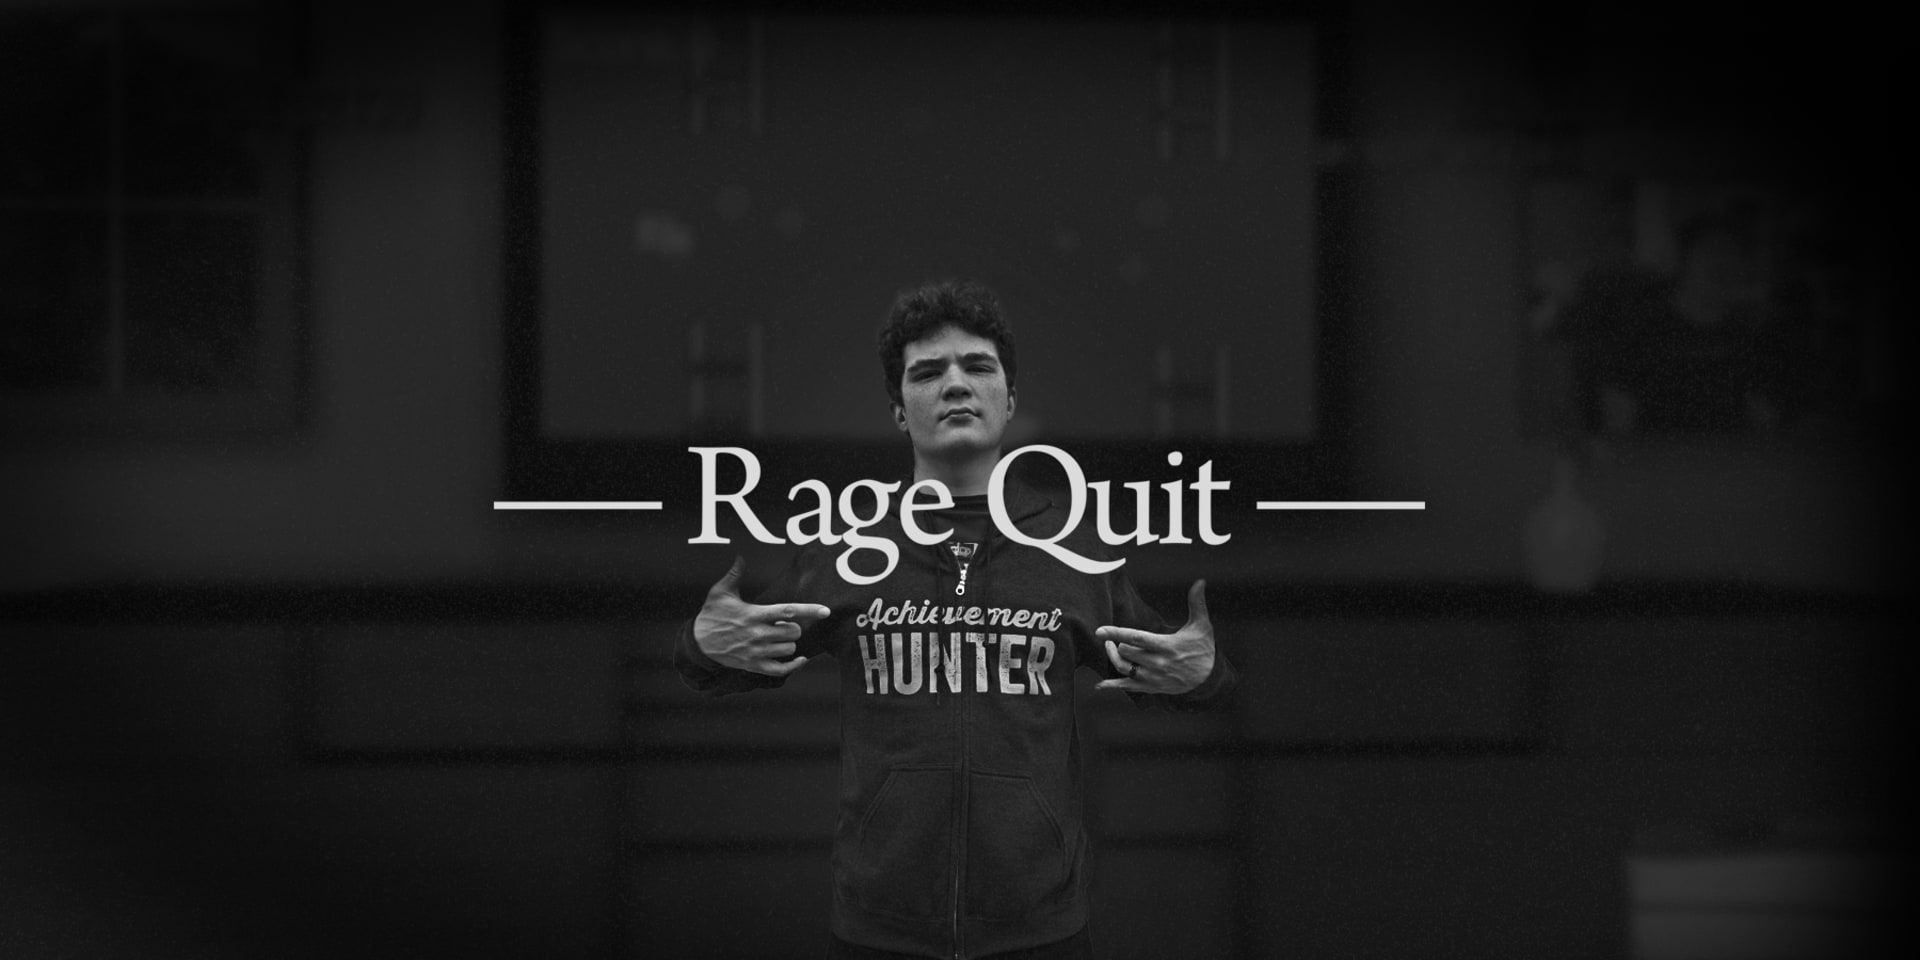 The First Rage Quit, Rage Quit